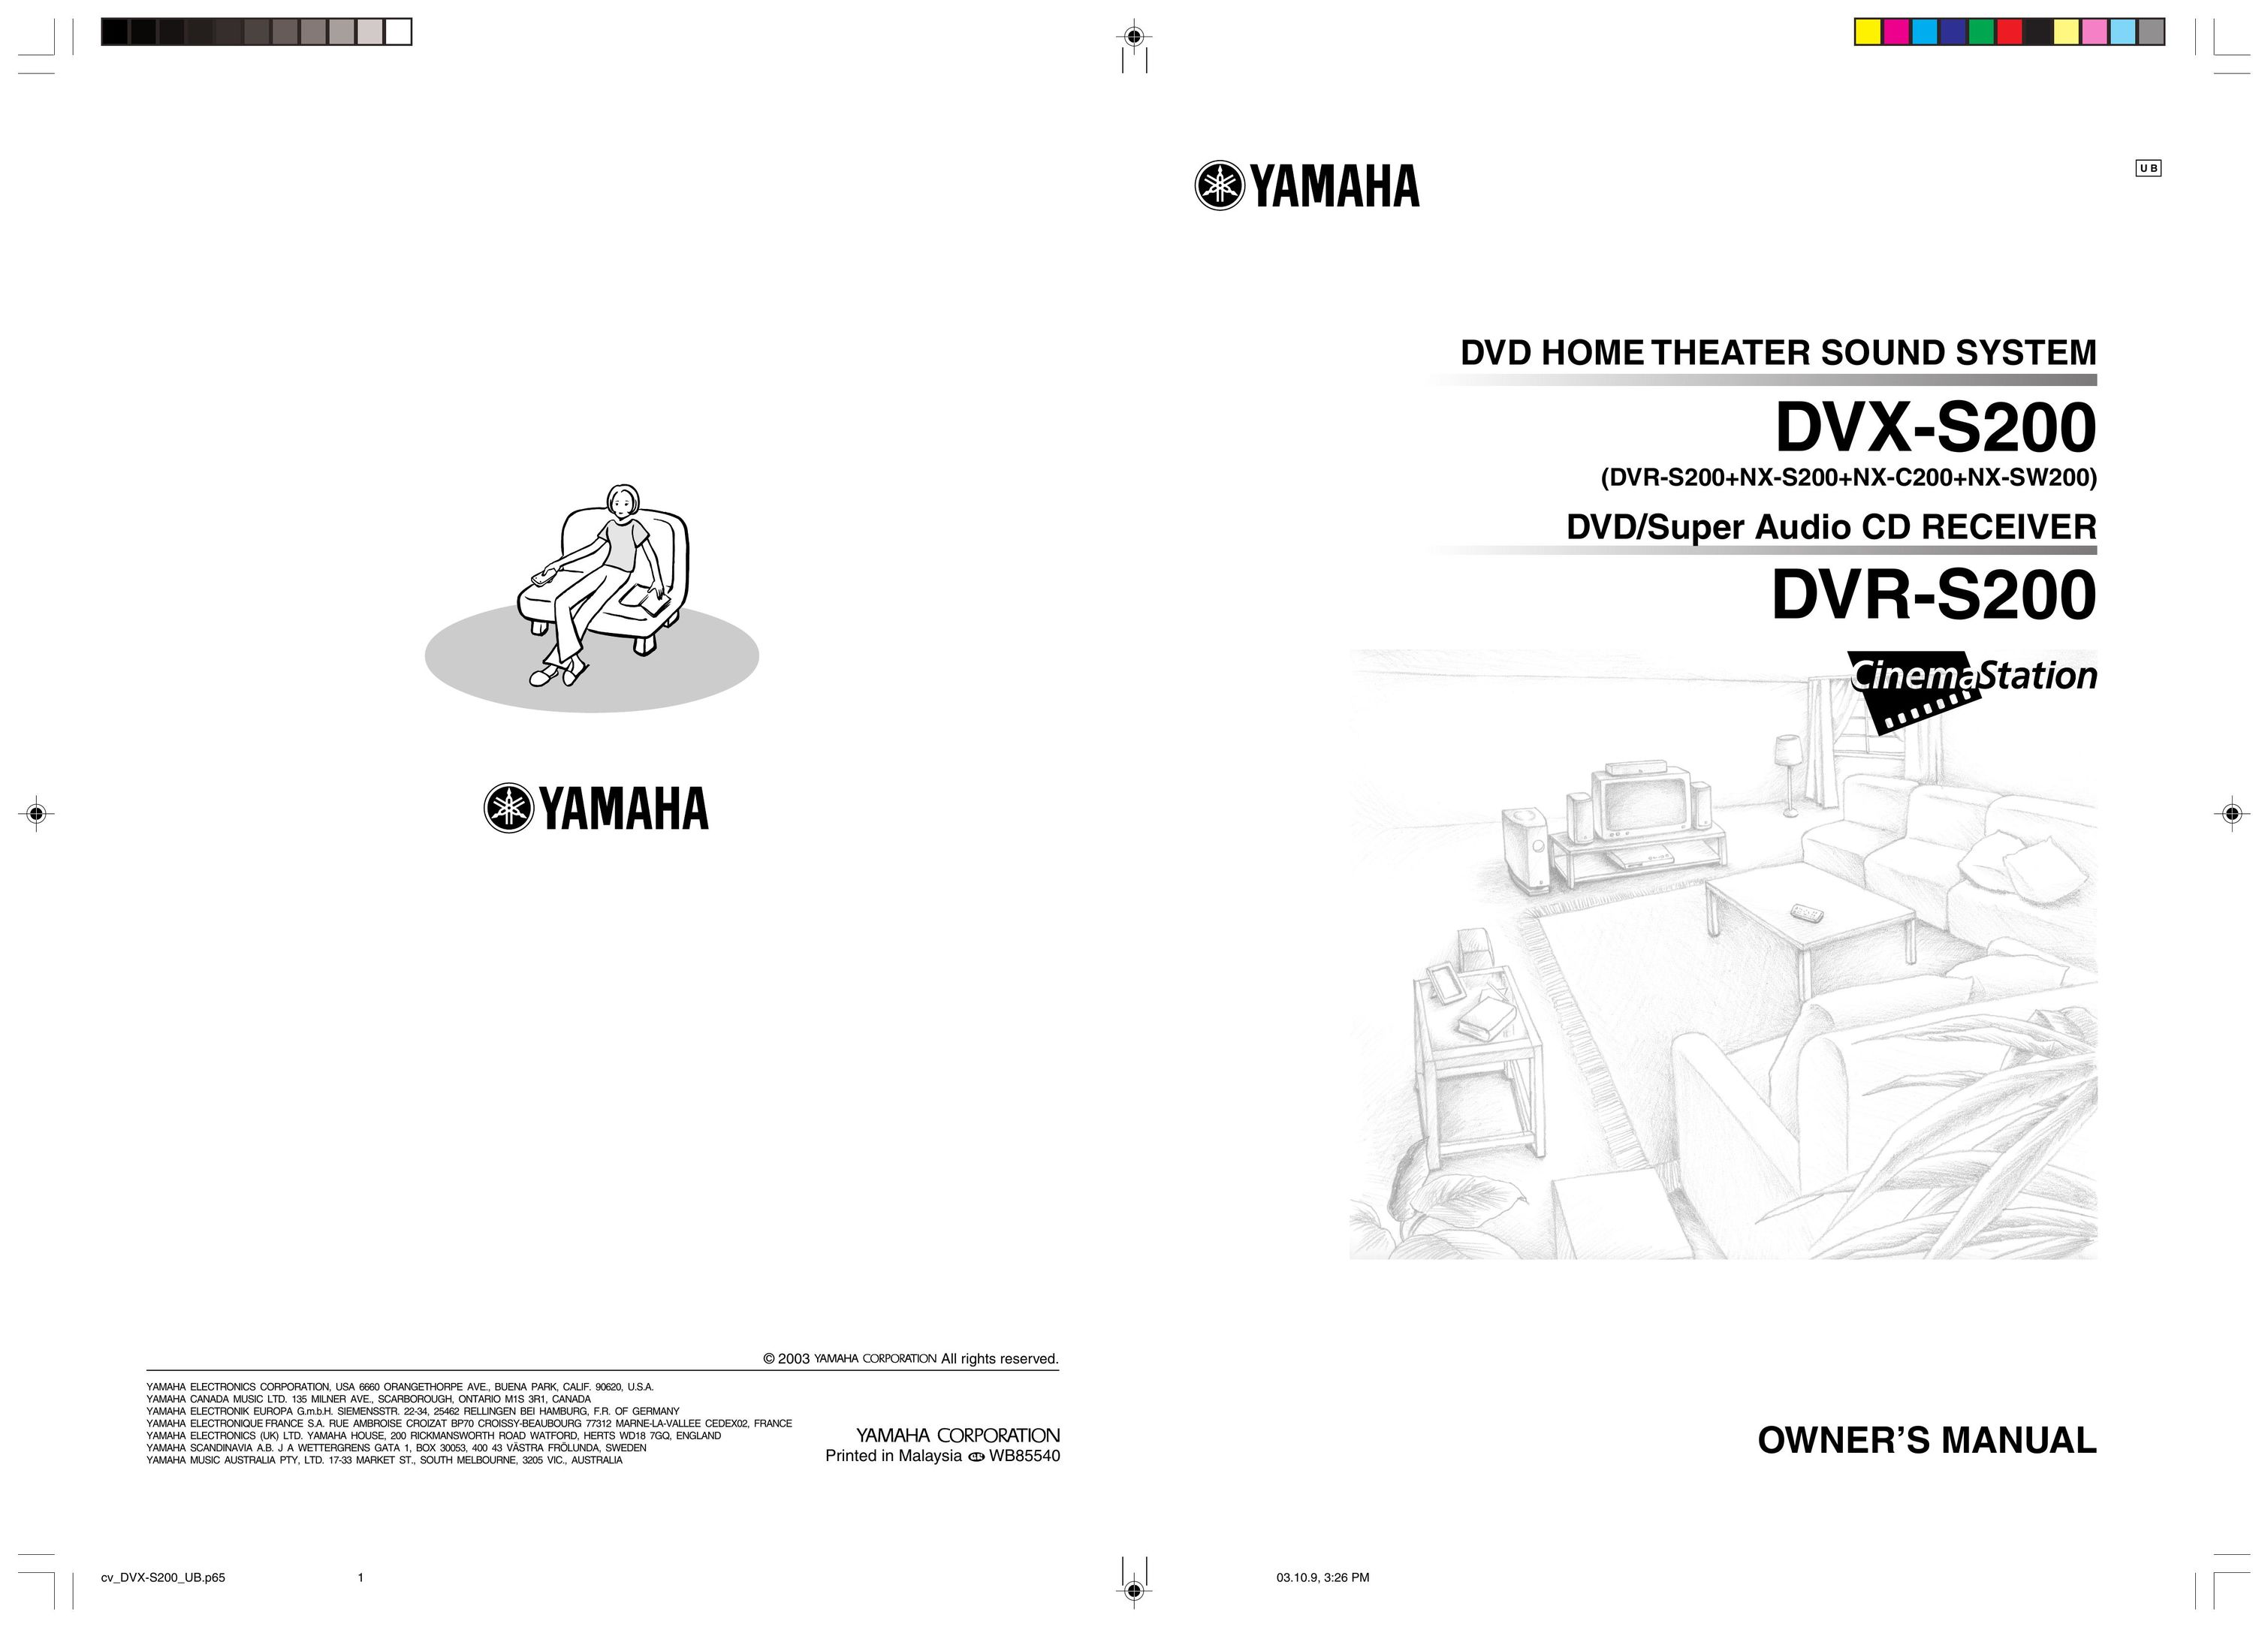 Yamaha DVX-S200 Home Theater System User Manual